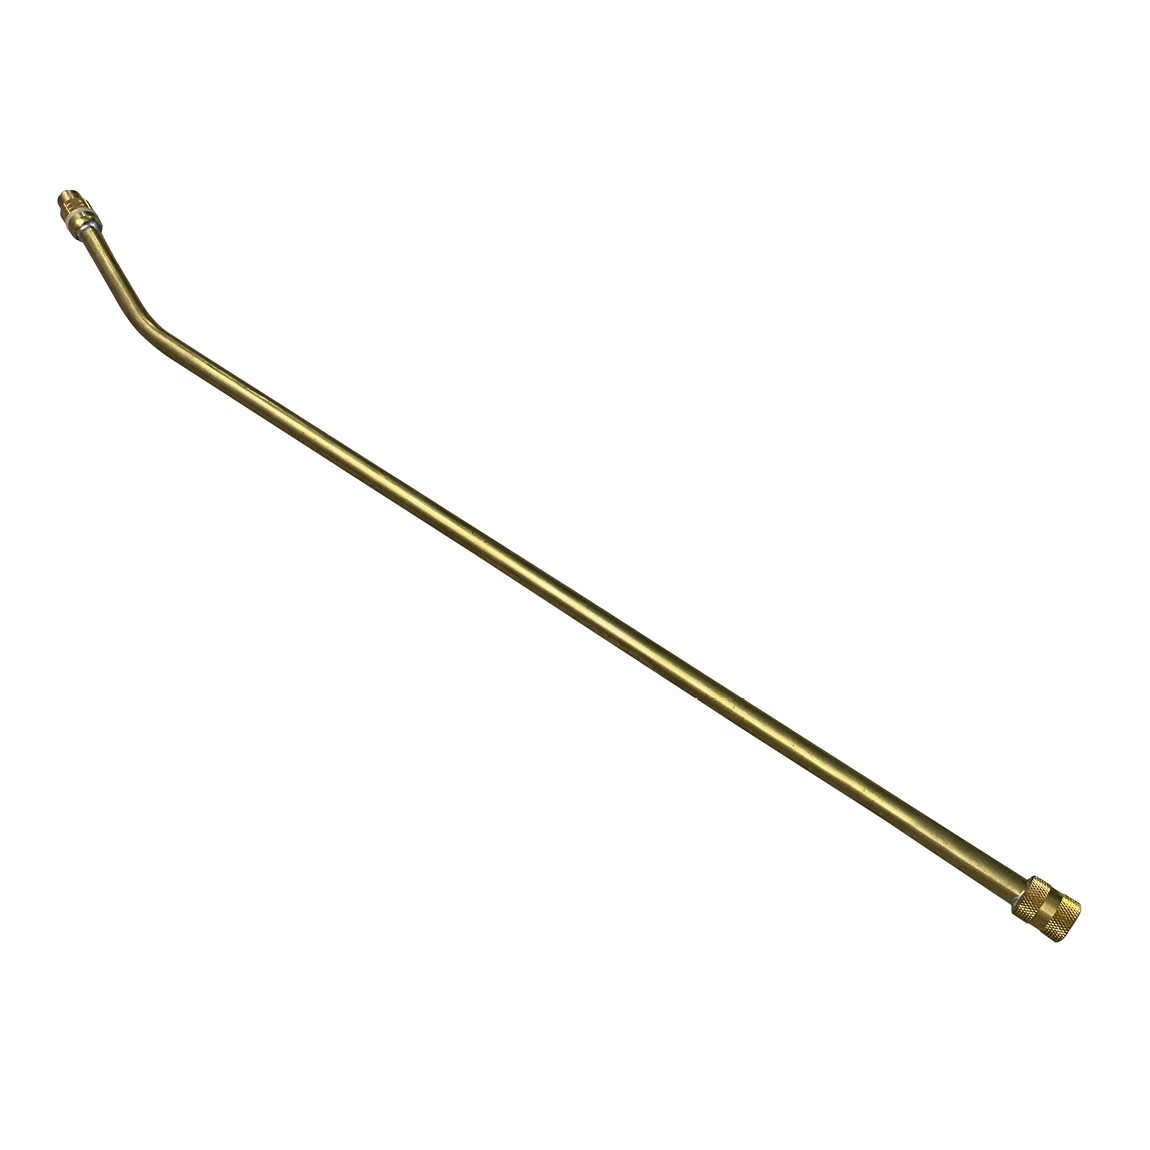 Mesto Spray Wand 3658. Curved spray wand made of brass with brass hollow cone nozzle 1.1 mm. This wand measures 50cm. This brass wand is a spare part and accessory is compatible with some models of Mesto Sprayer. Available from Speedcrete, United Kingdom.